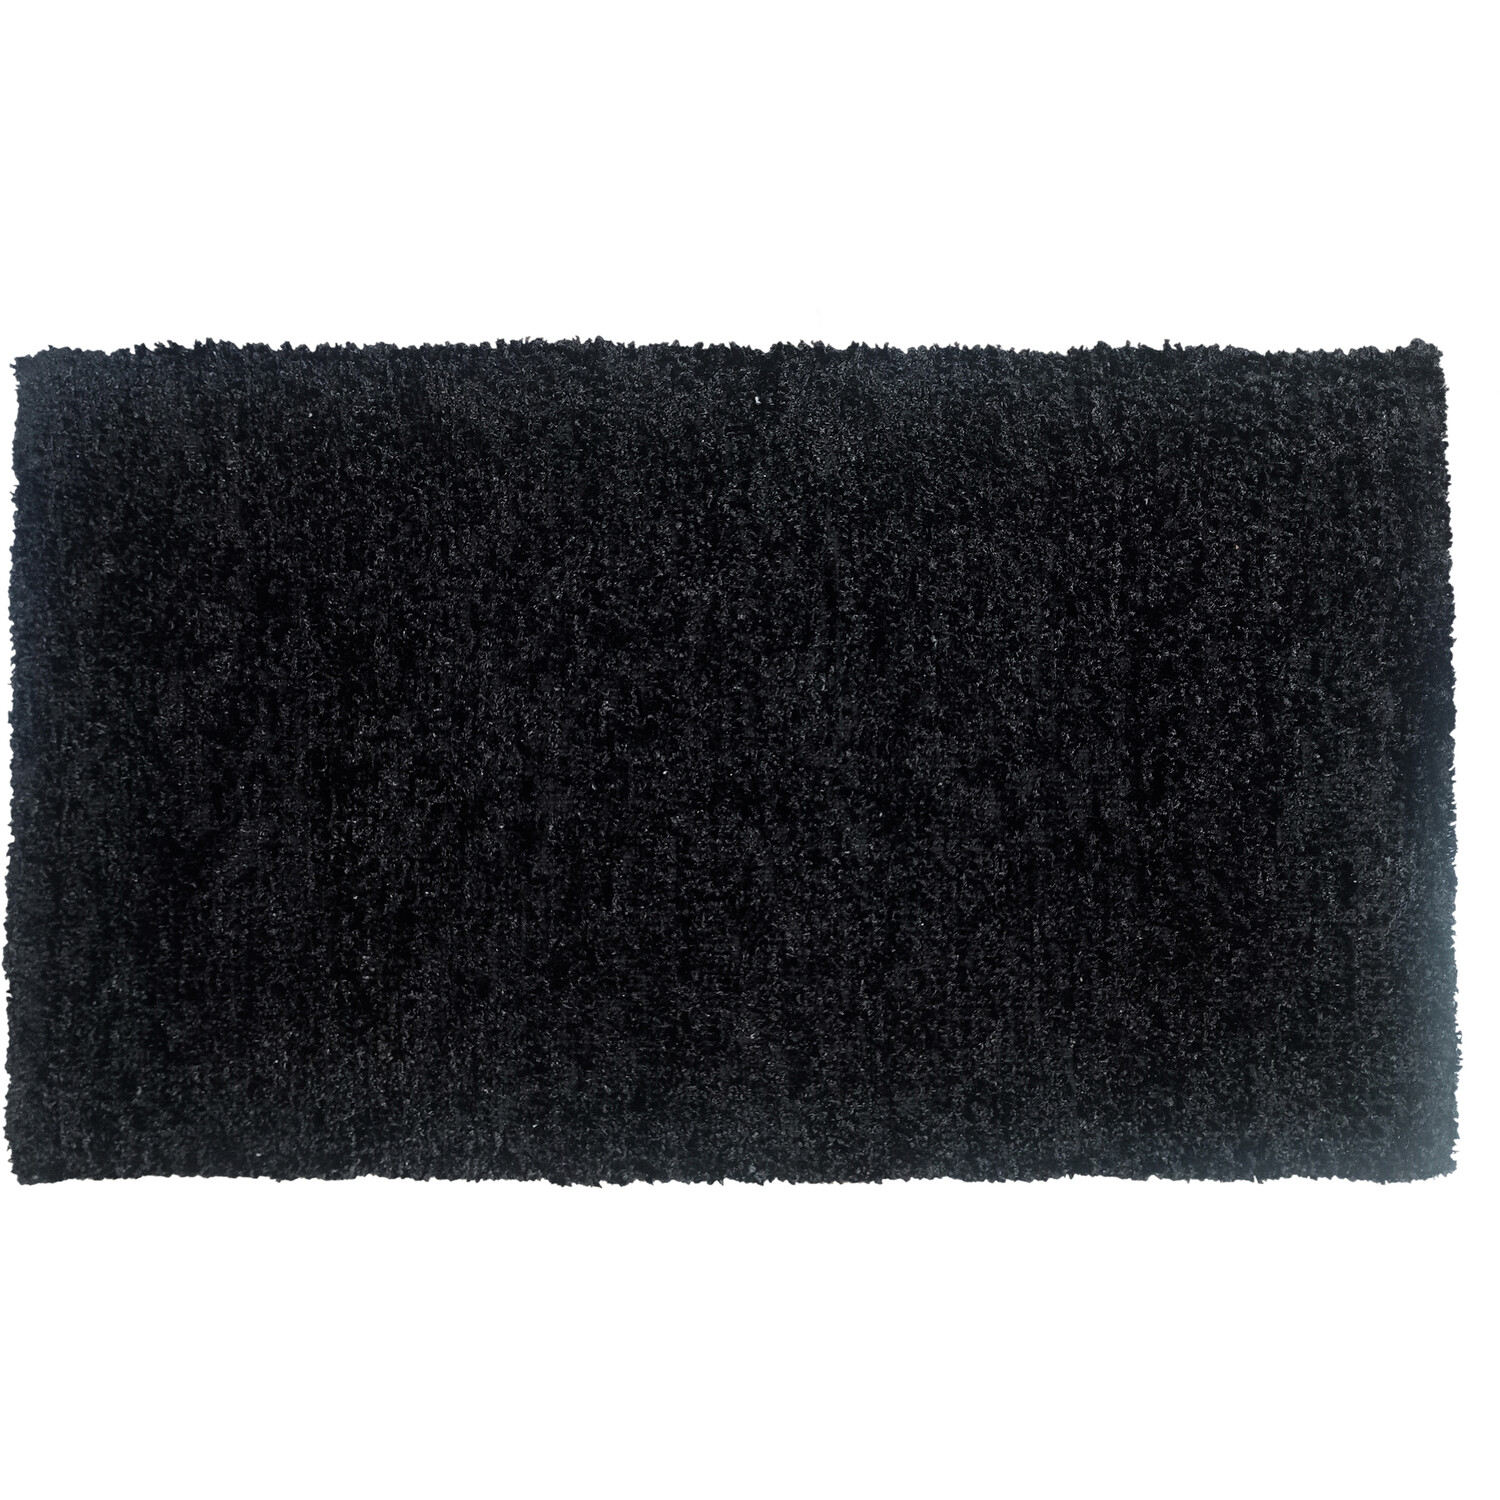 Chenille Luxe Rug - Black Image